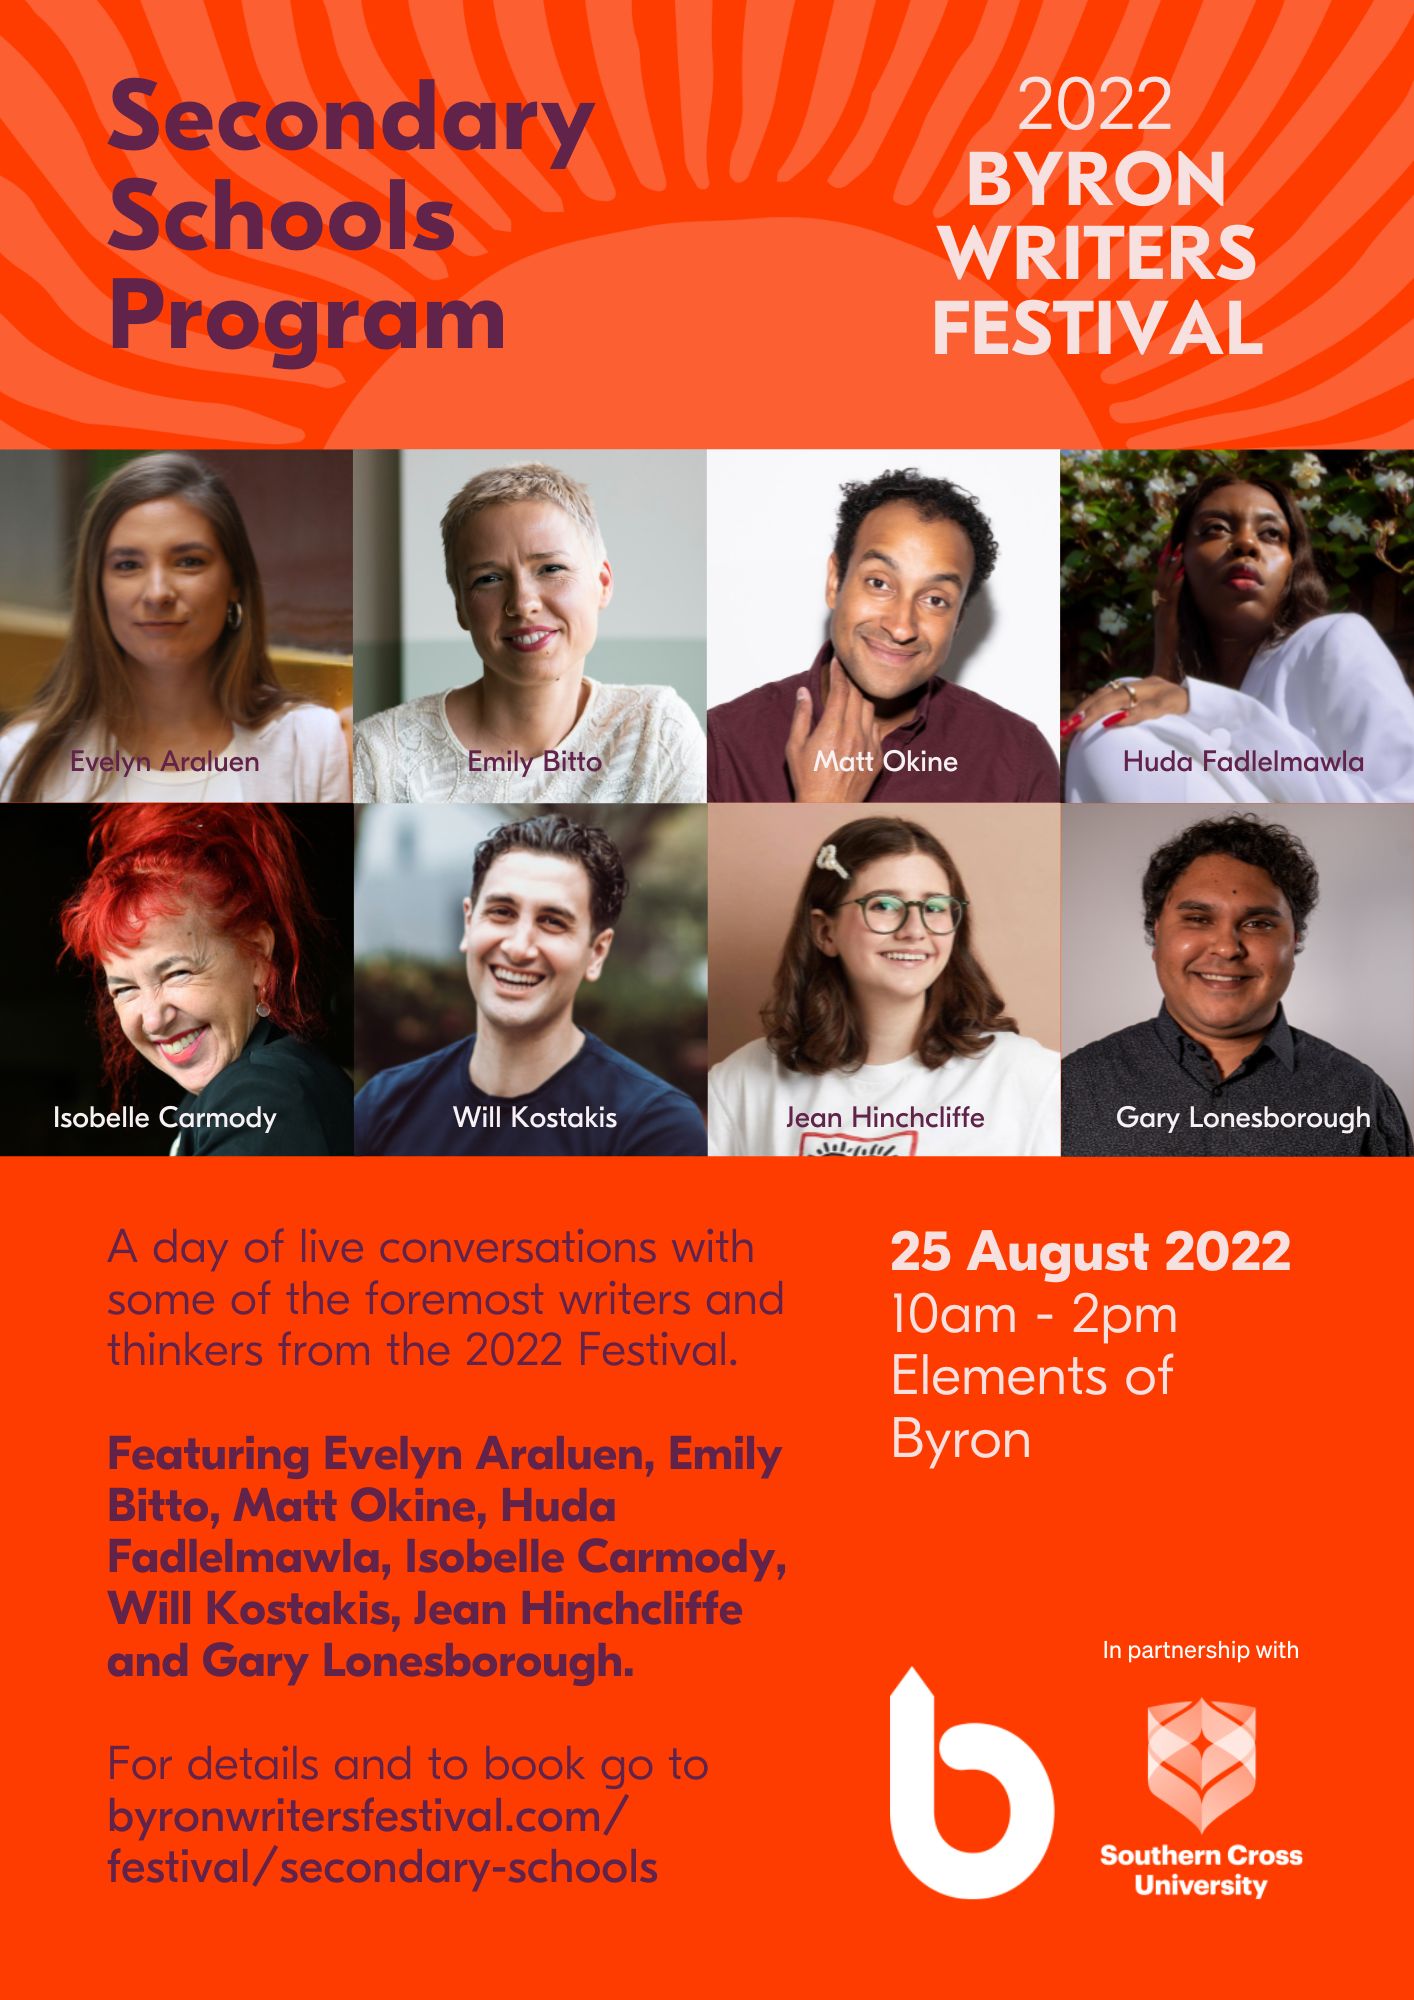 https://byronwritersfestival.com/wp-content/uploads/2022/07/Secondary-Schools-2022-A4-Poster.jpg